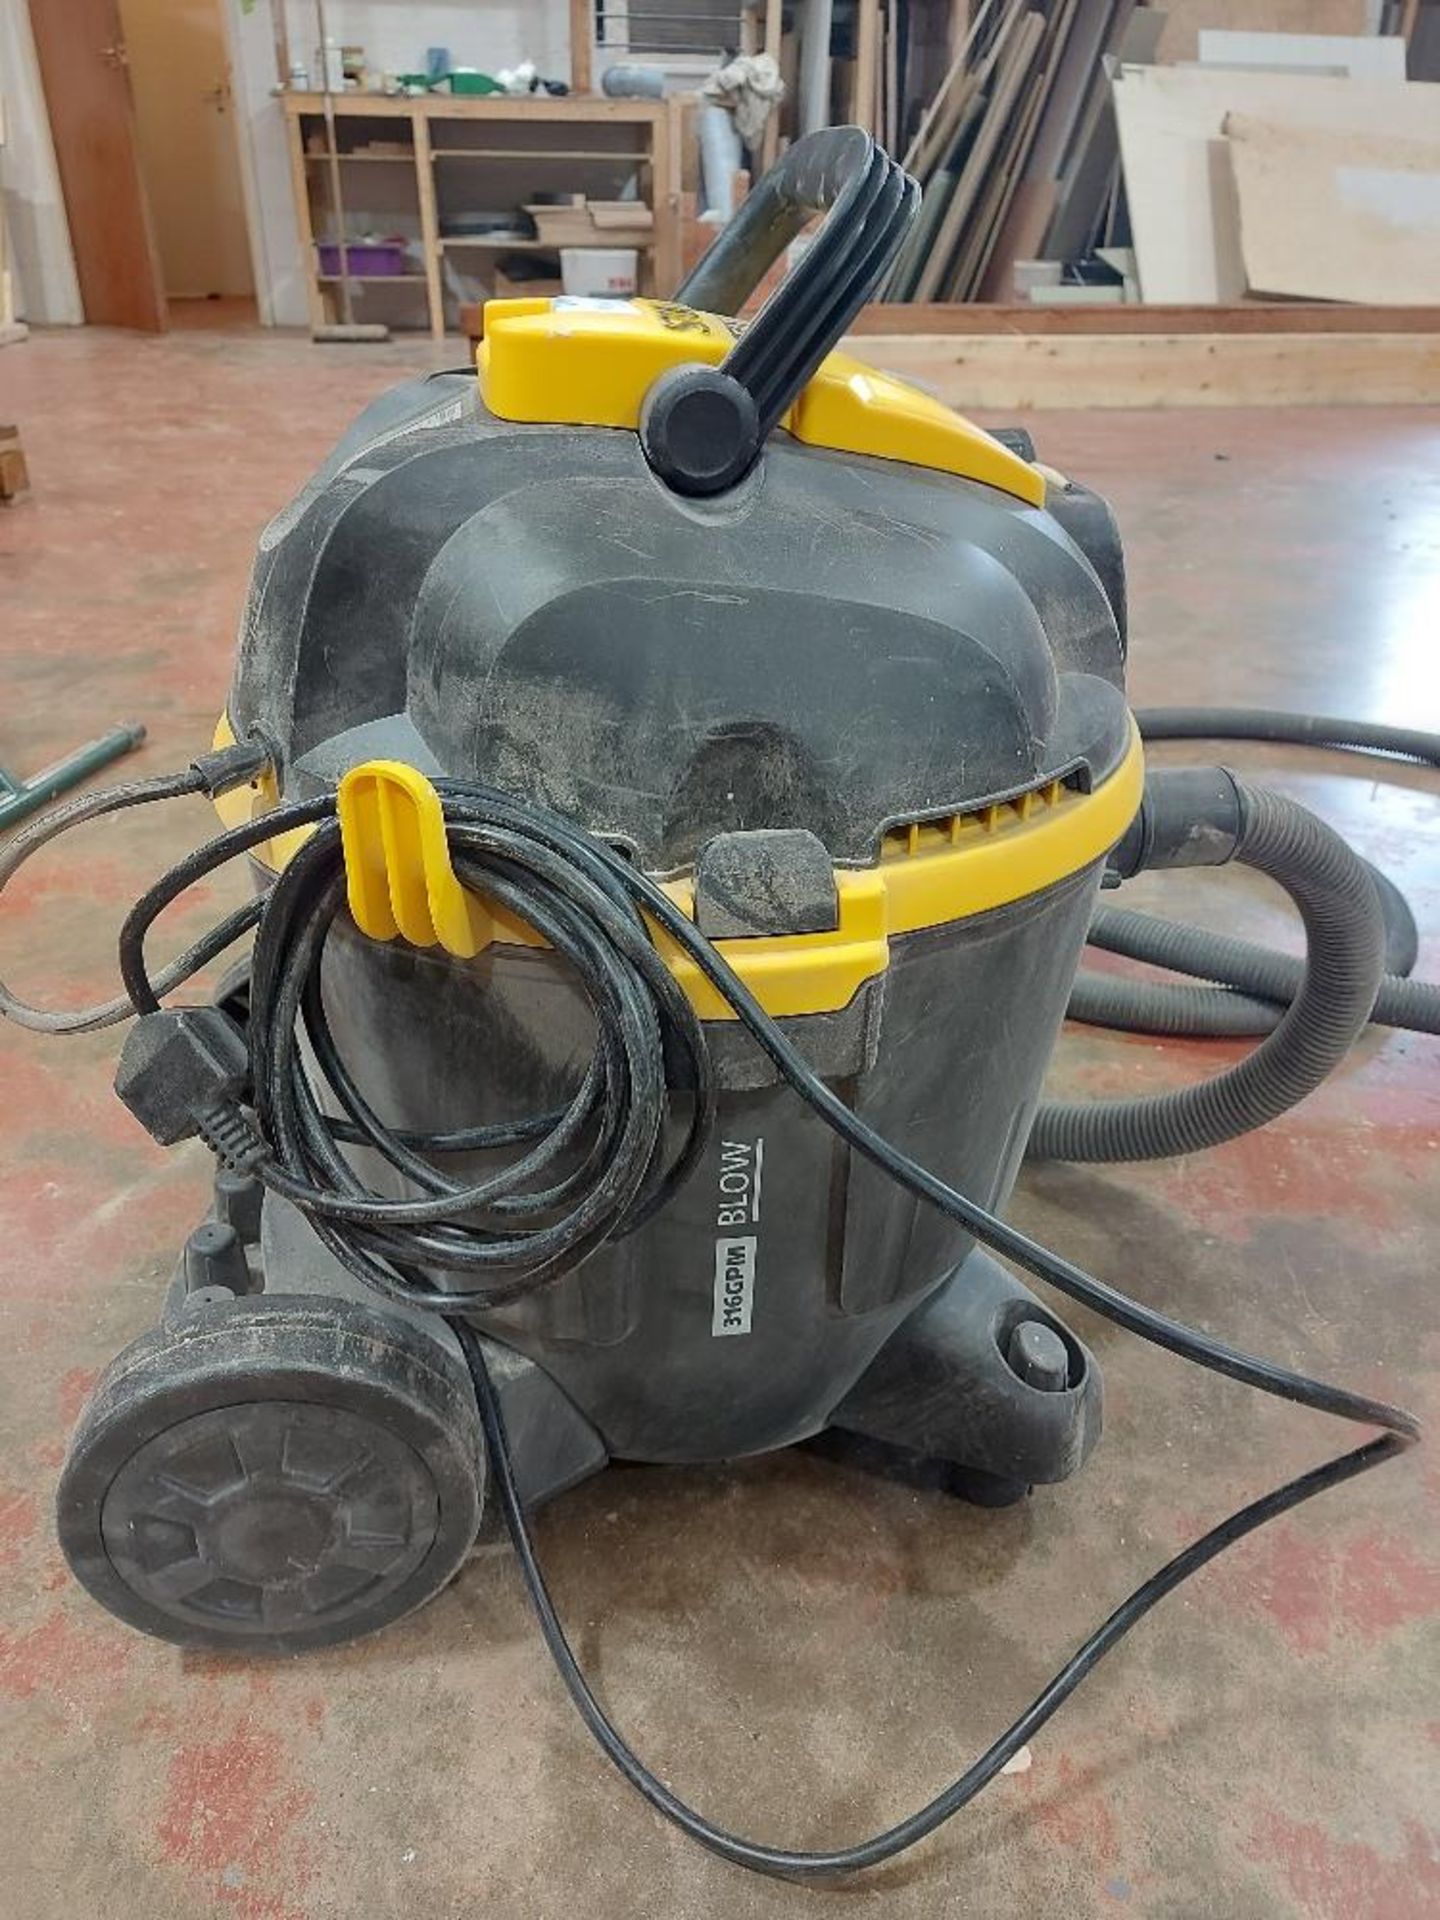 Stanley Fatmax 316GPM Wet / Dry Vacuum - Image 2 of 5